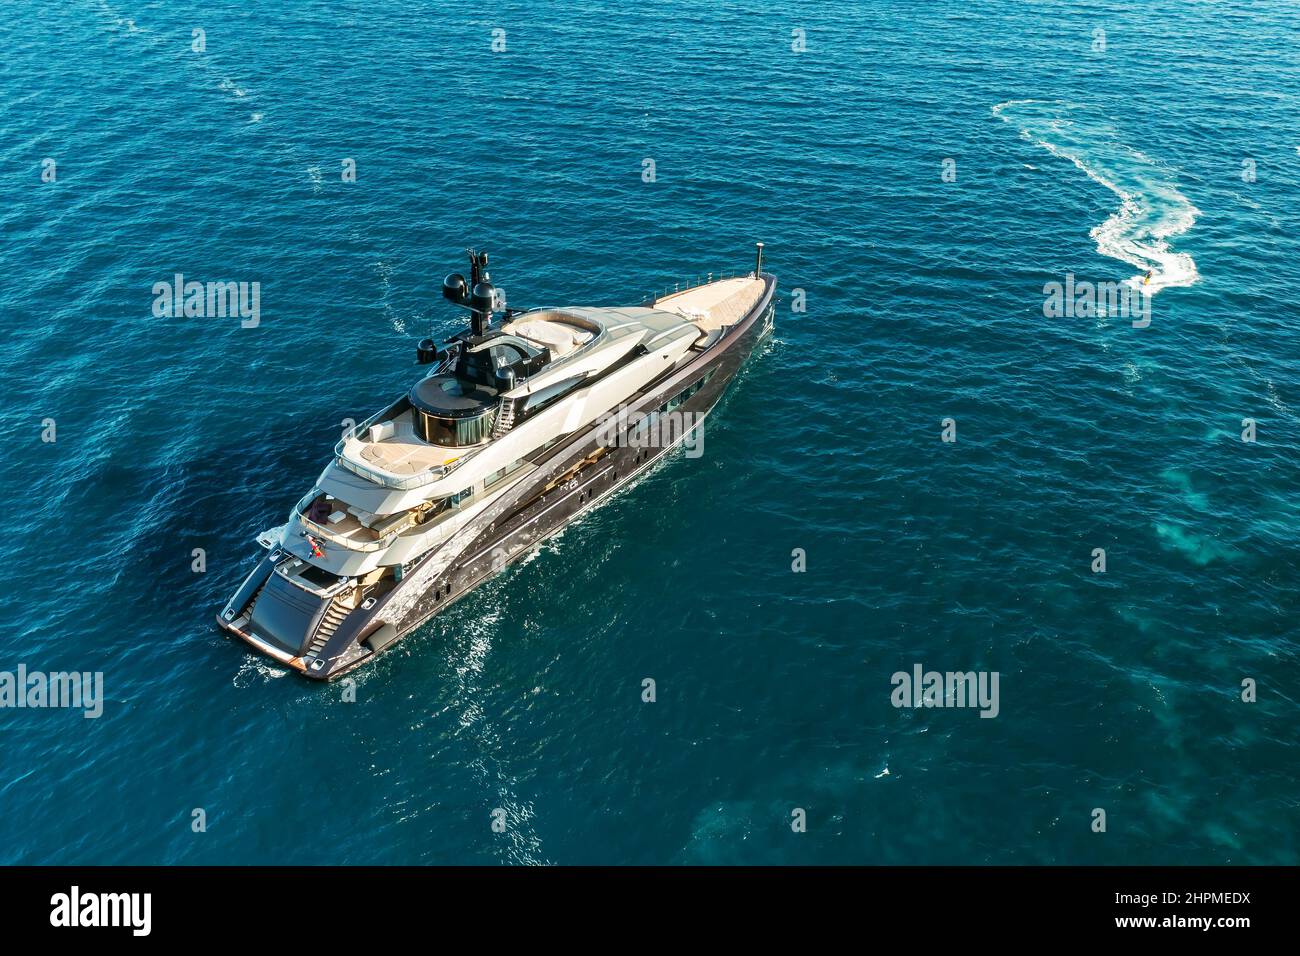 ROVINJ, CZECH REPUBLIC - JULY 03 2021: Luxurious yacht drifts in Adriatic sea illuminated by bright sunlight reflected from water. Calm sea rippling water with small waves. Upper view Stock Photo